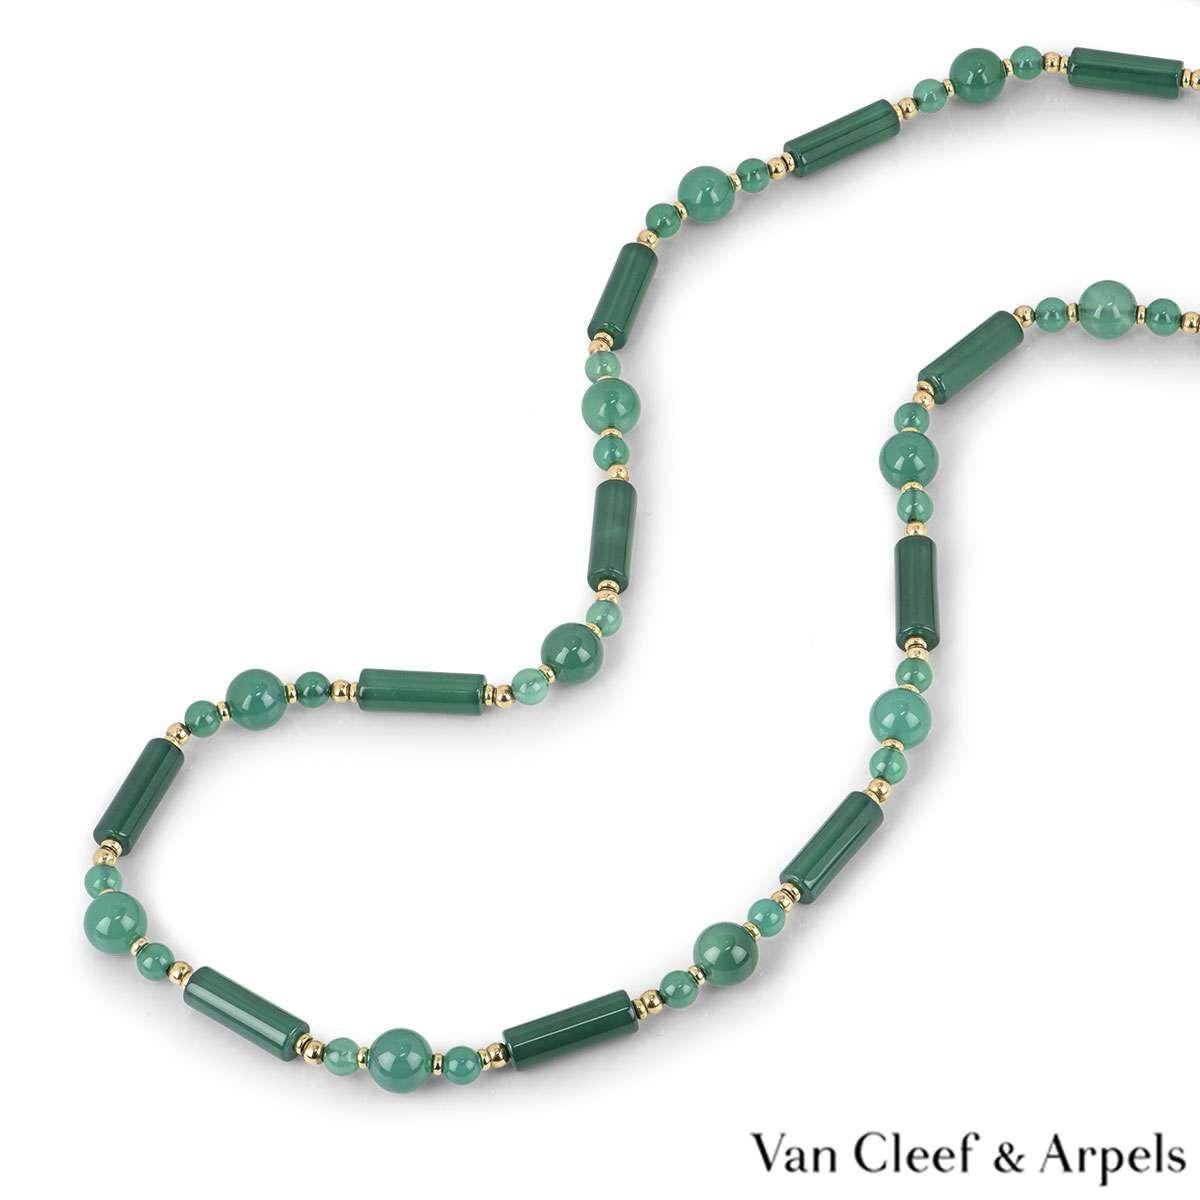 Mixed Cut Van Cleef & Arpels Yellow Gold Chalcedony Beaded Necklace